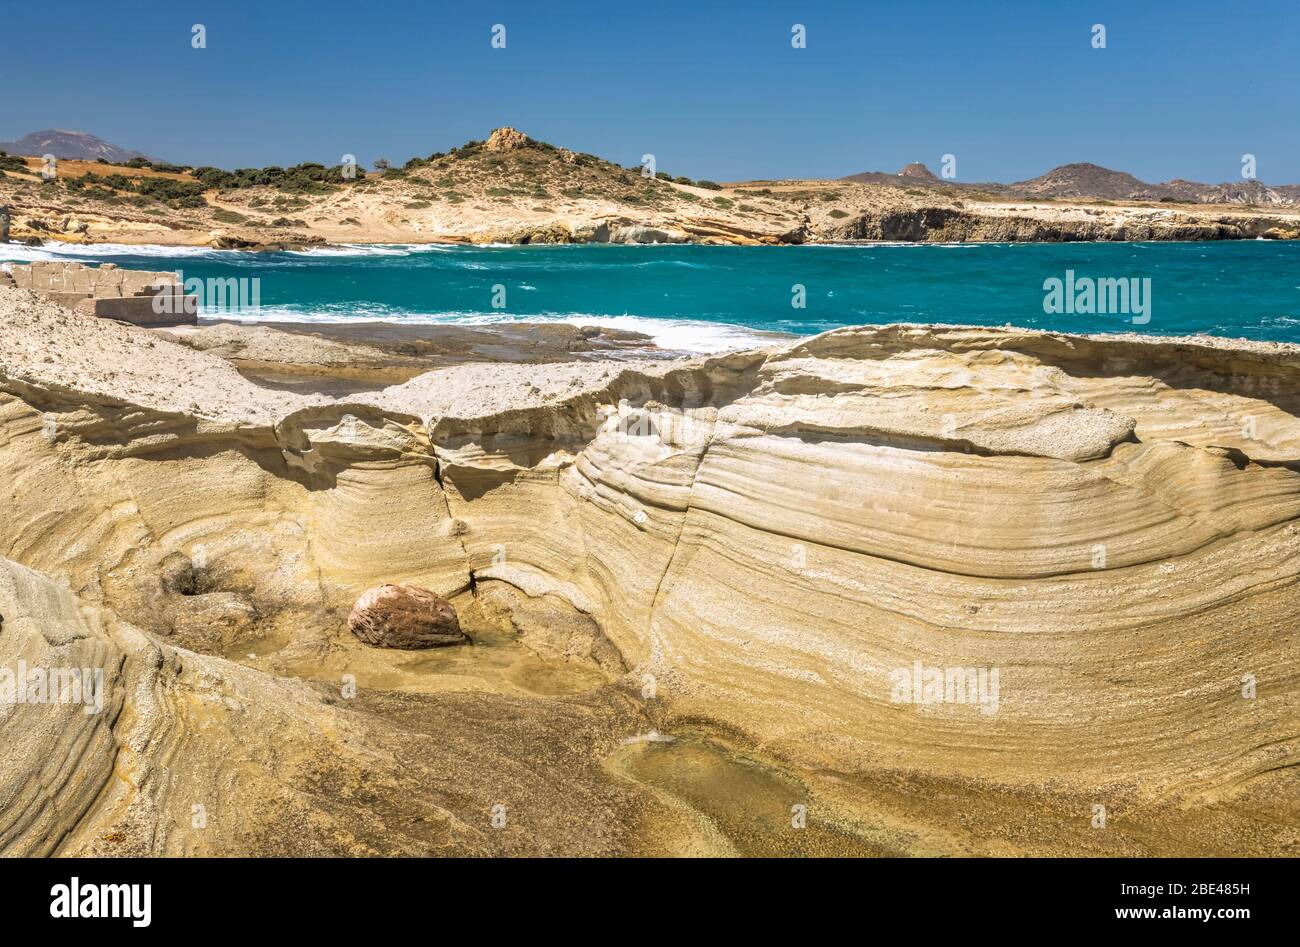 Eroded rock formations along the shore and turquoise ocean water along the coast of a greek island; Milos, Greece Stock Photo